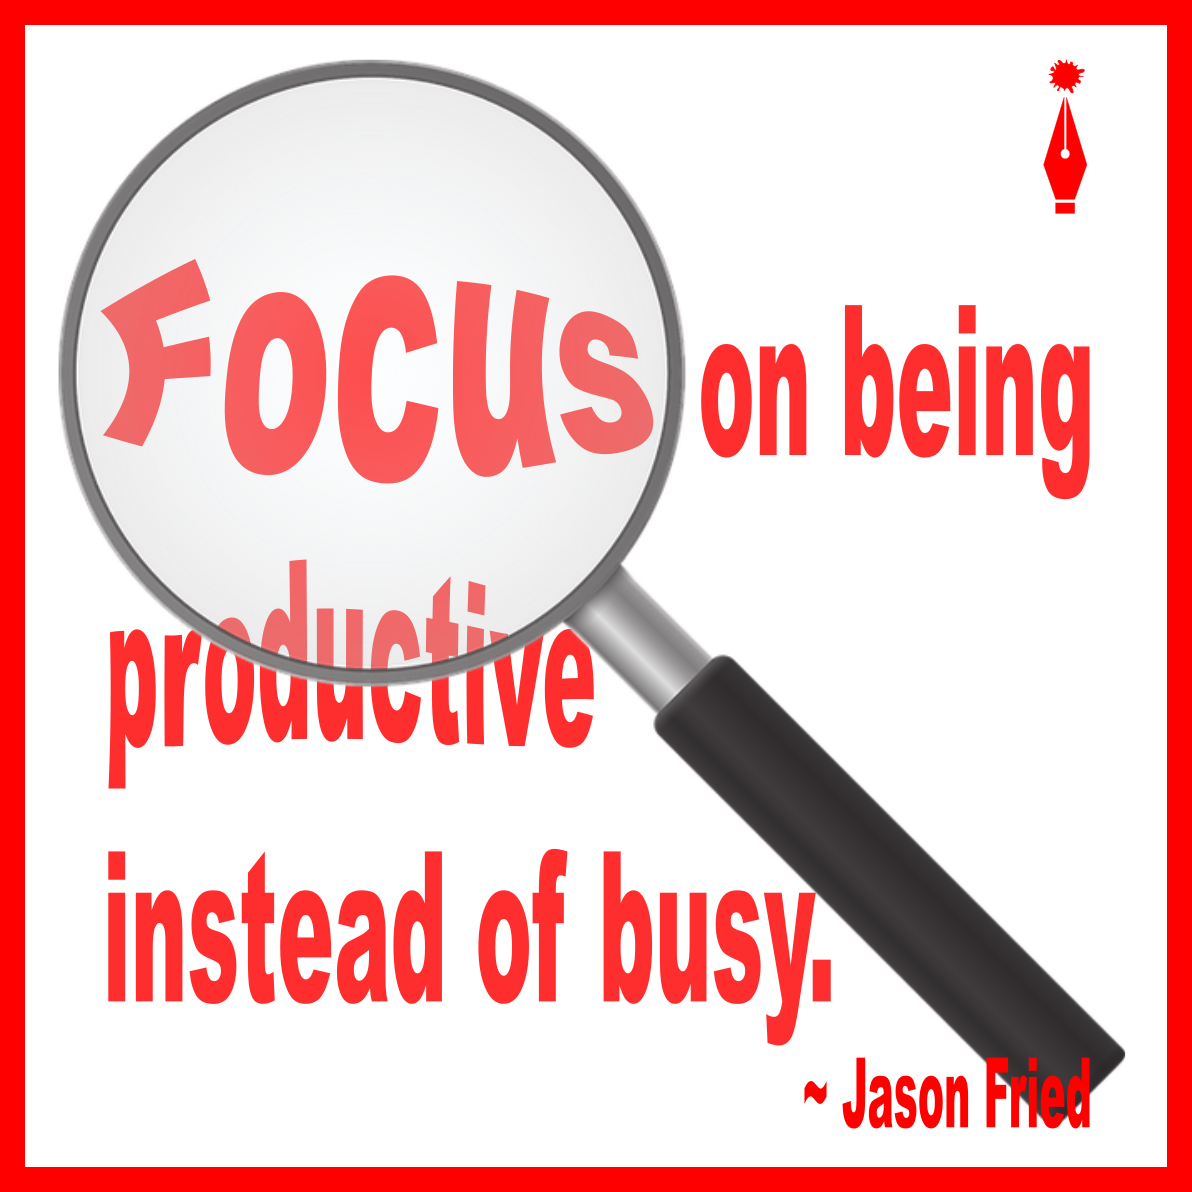 Jason Fried quote